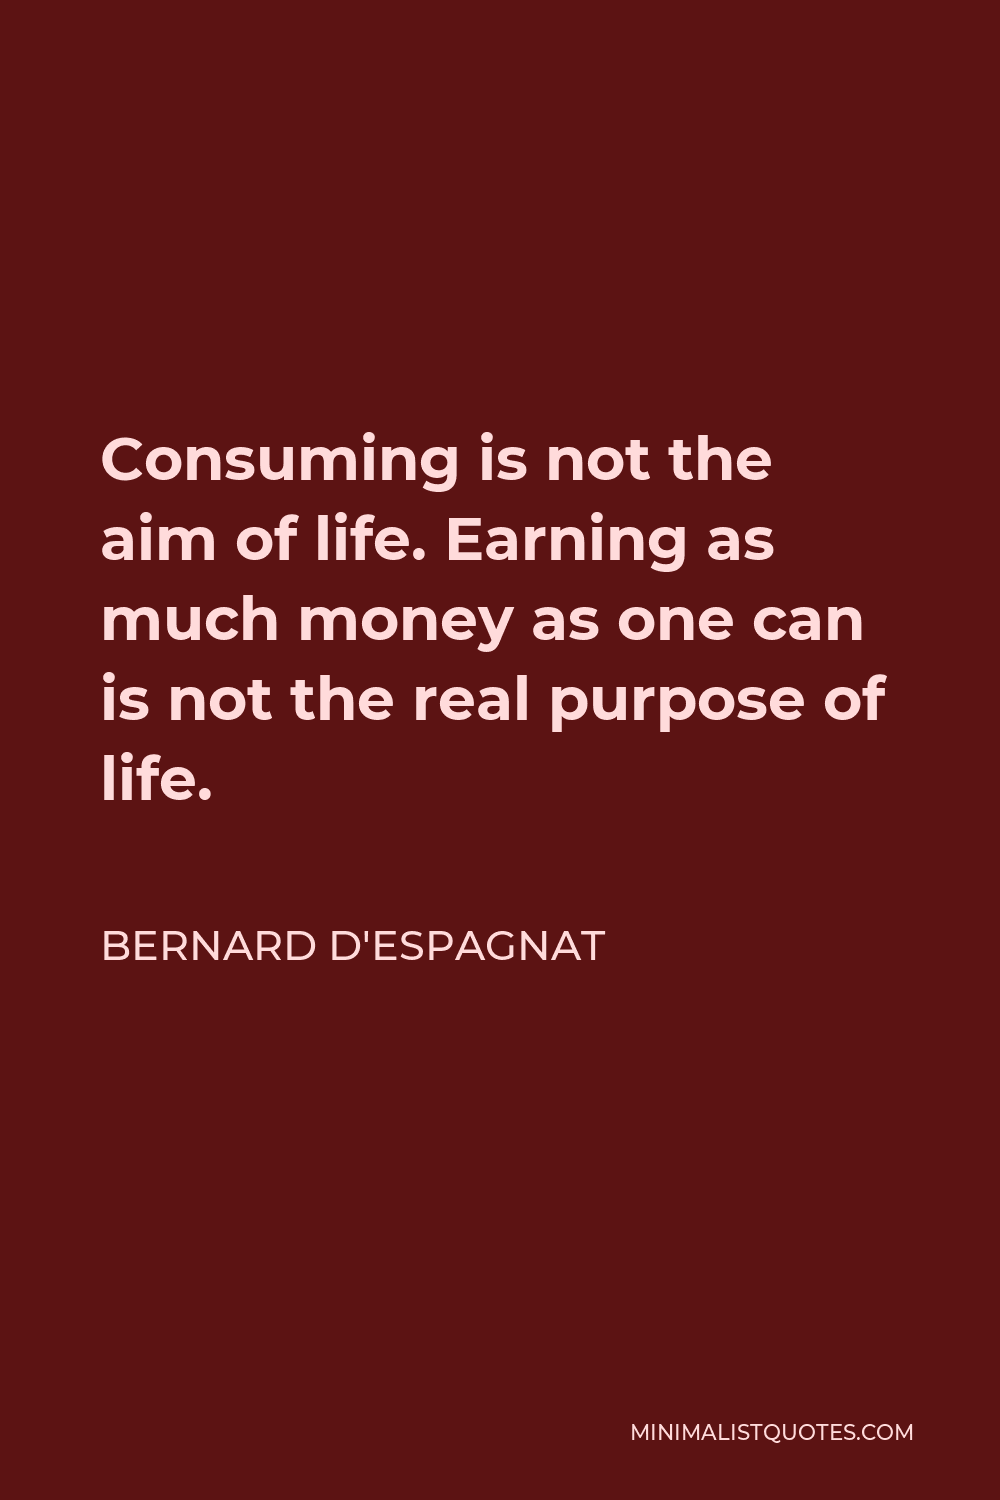 Bernard d'Espagnat Quote - Consuming is not the aim of life. Earning as much money as one can is not the real purpose of life.